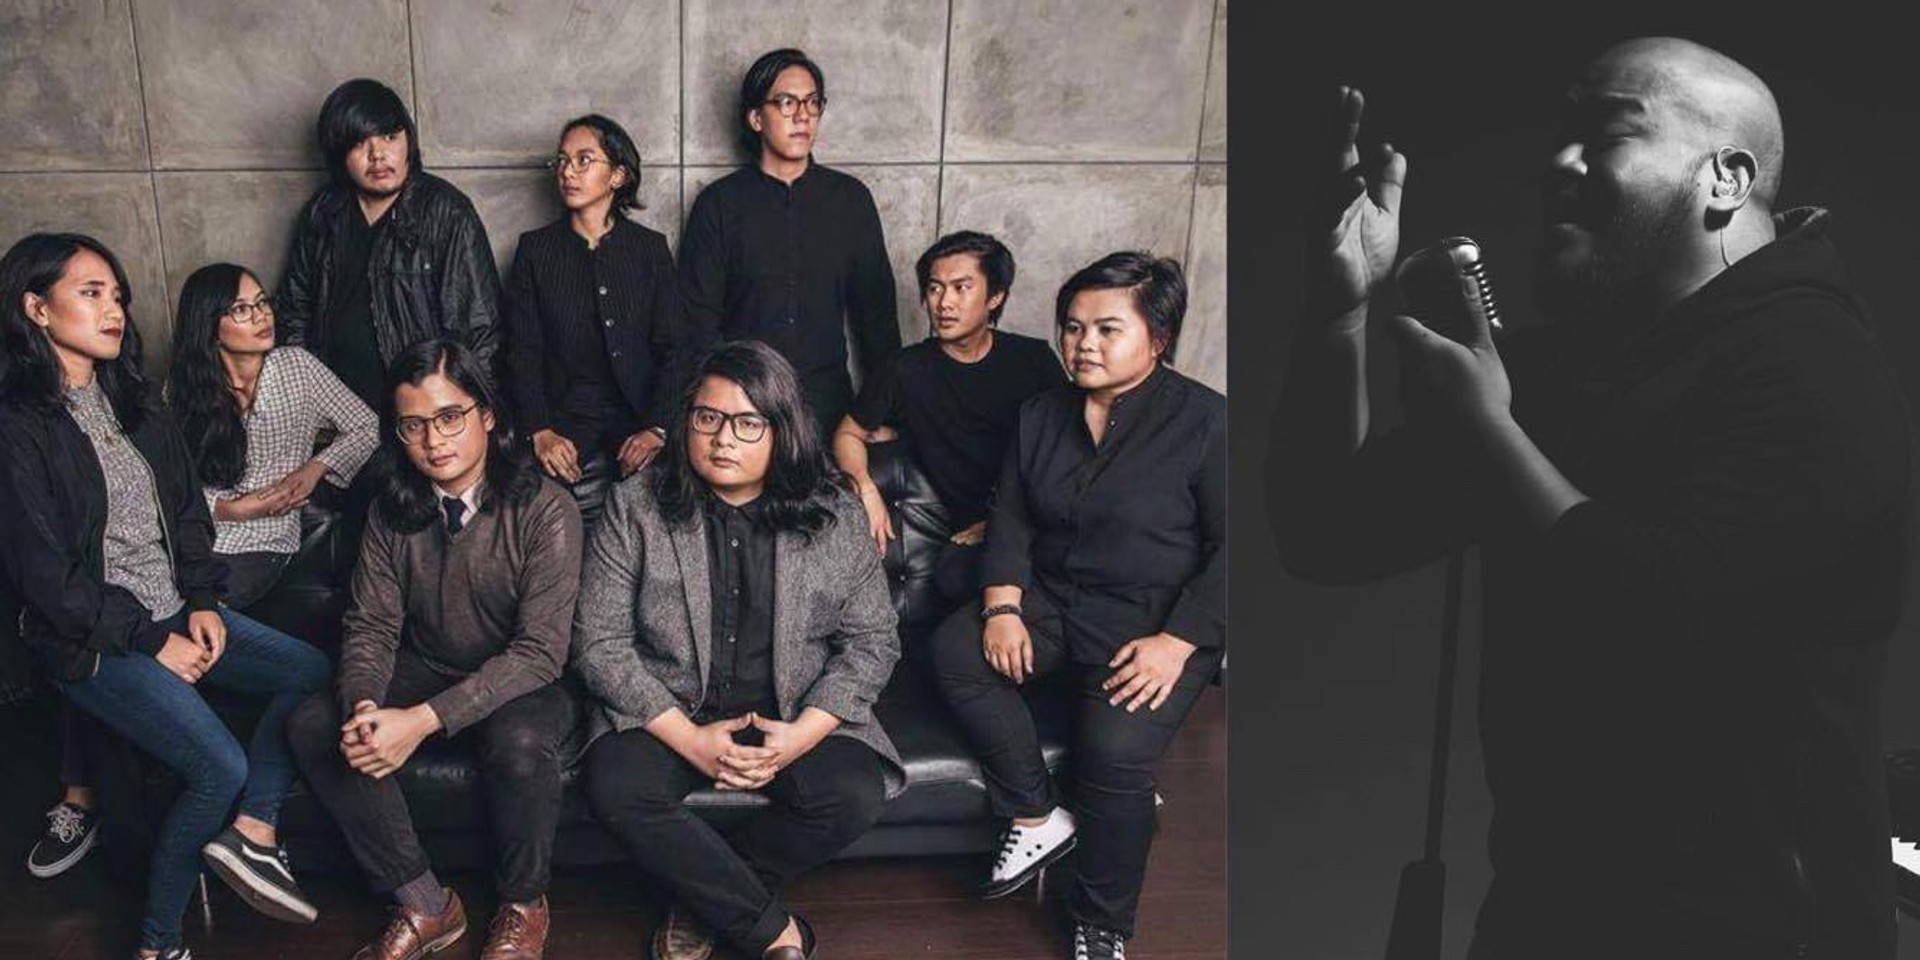 Ben&Ben and QUEST join Kodaline, FKJ, LAUV, and more in Wanderland 2018